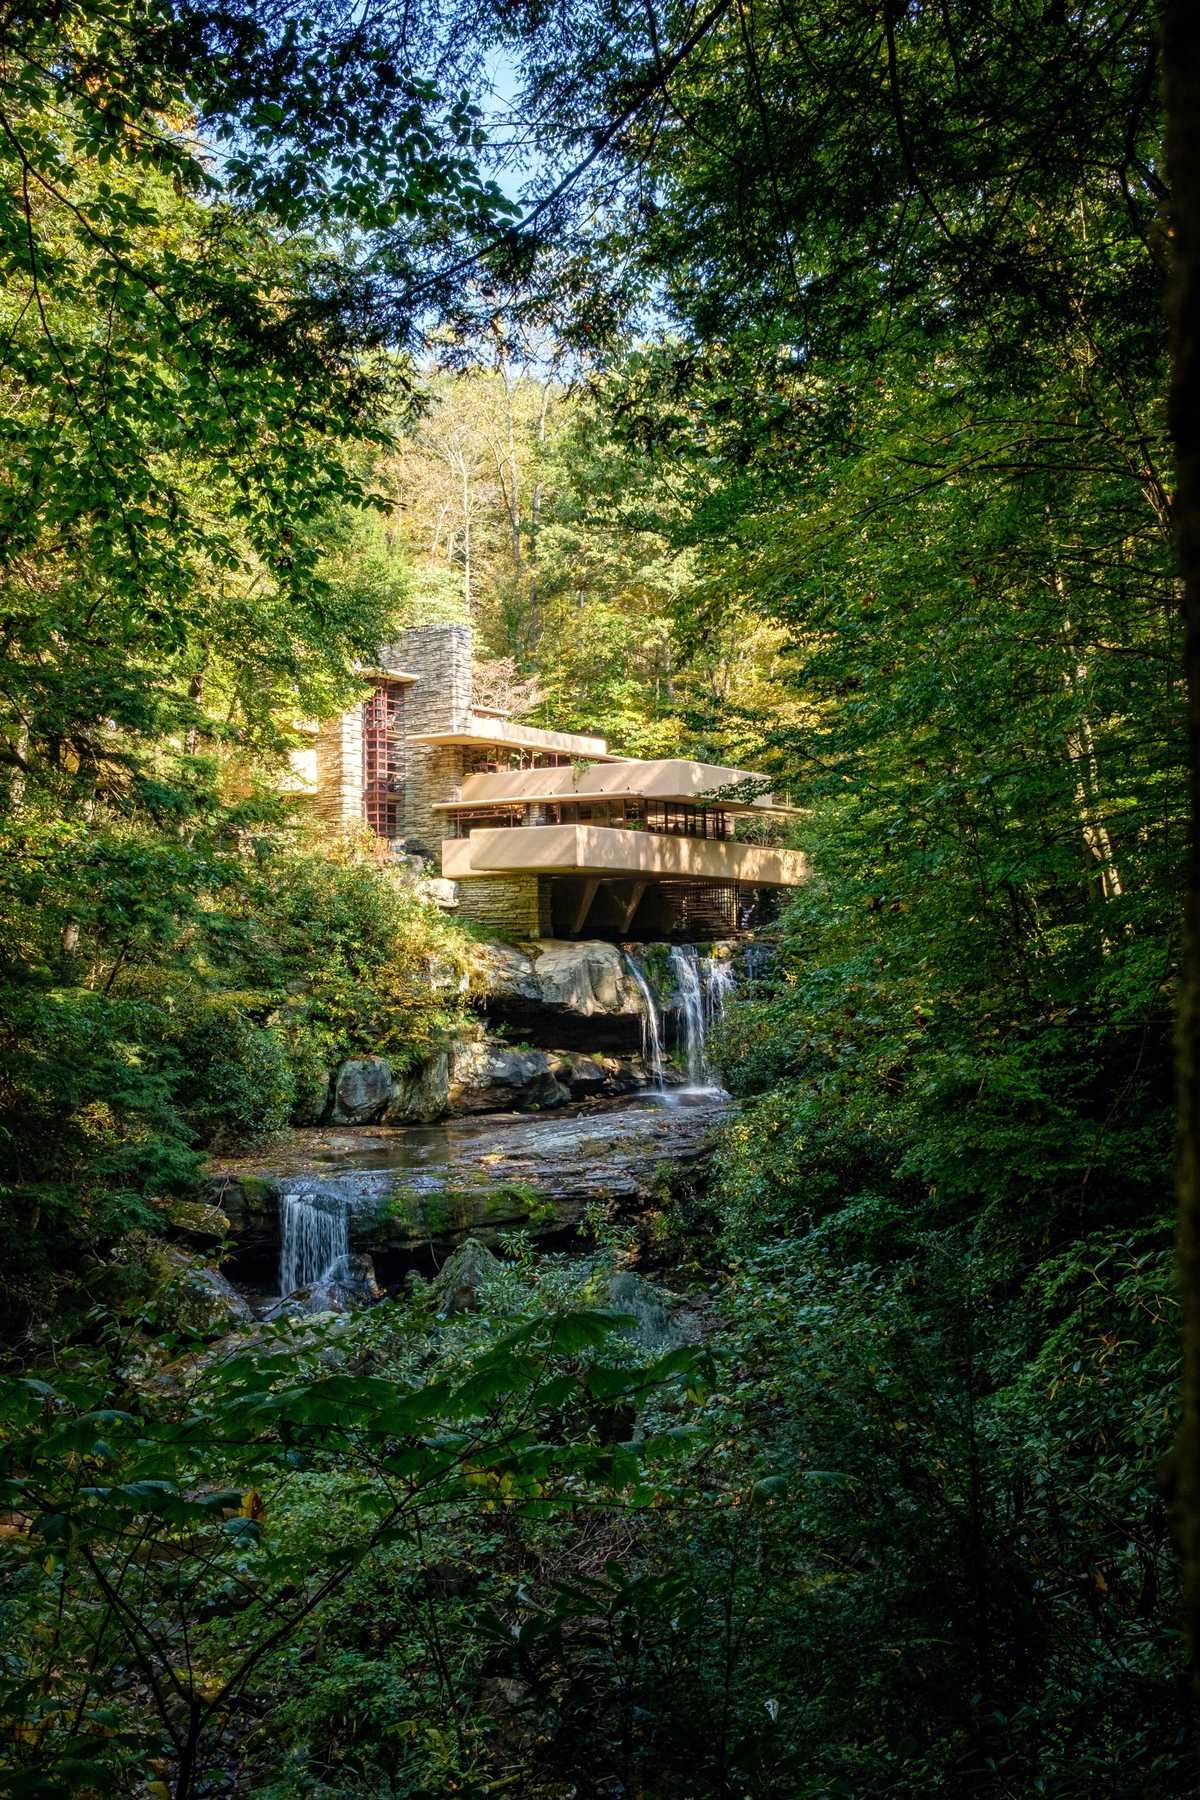 Fallingwater from the viewpoint